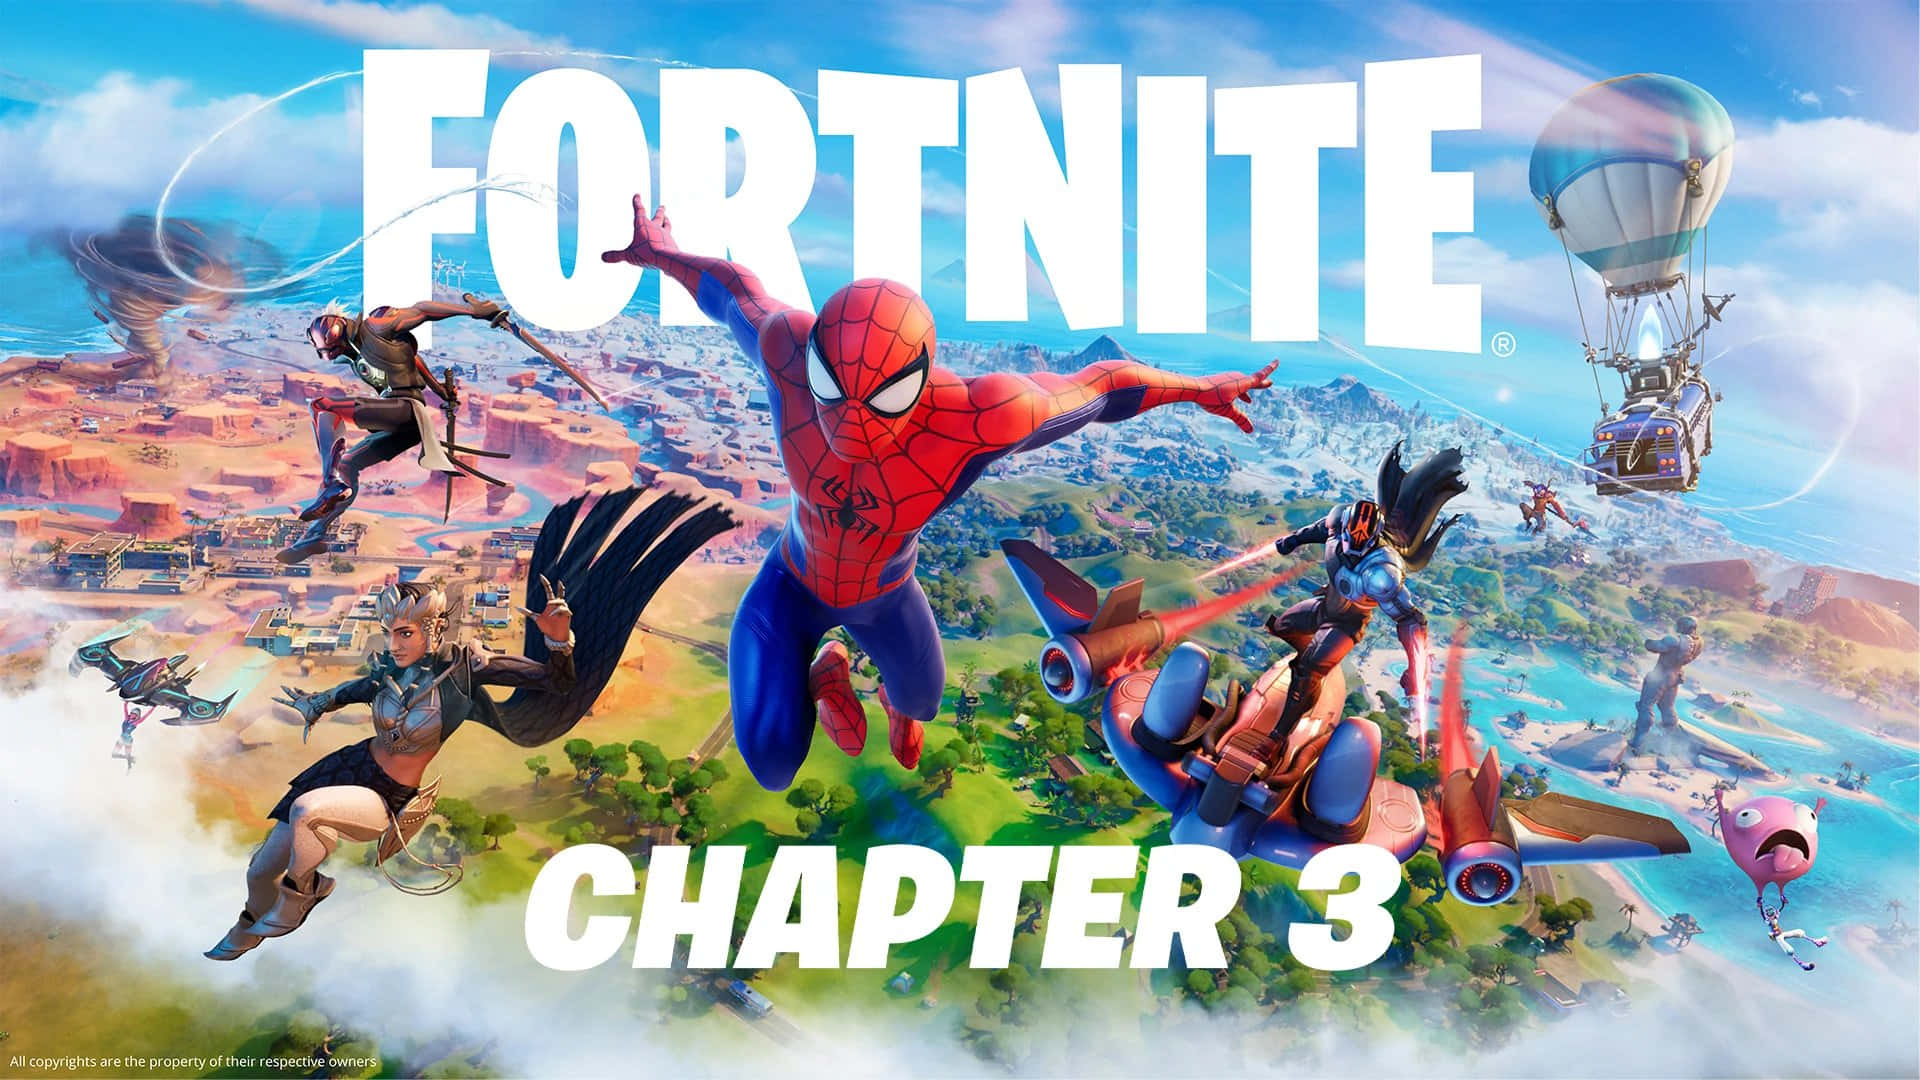 Experience the High Seas Adventure in Fortnite’s Chapter 3 Season 1 Wallpaper